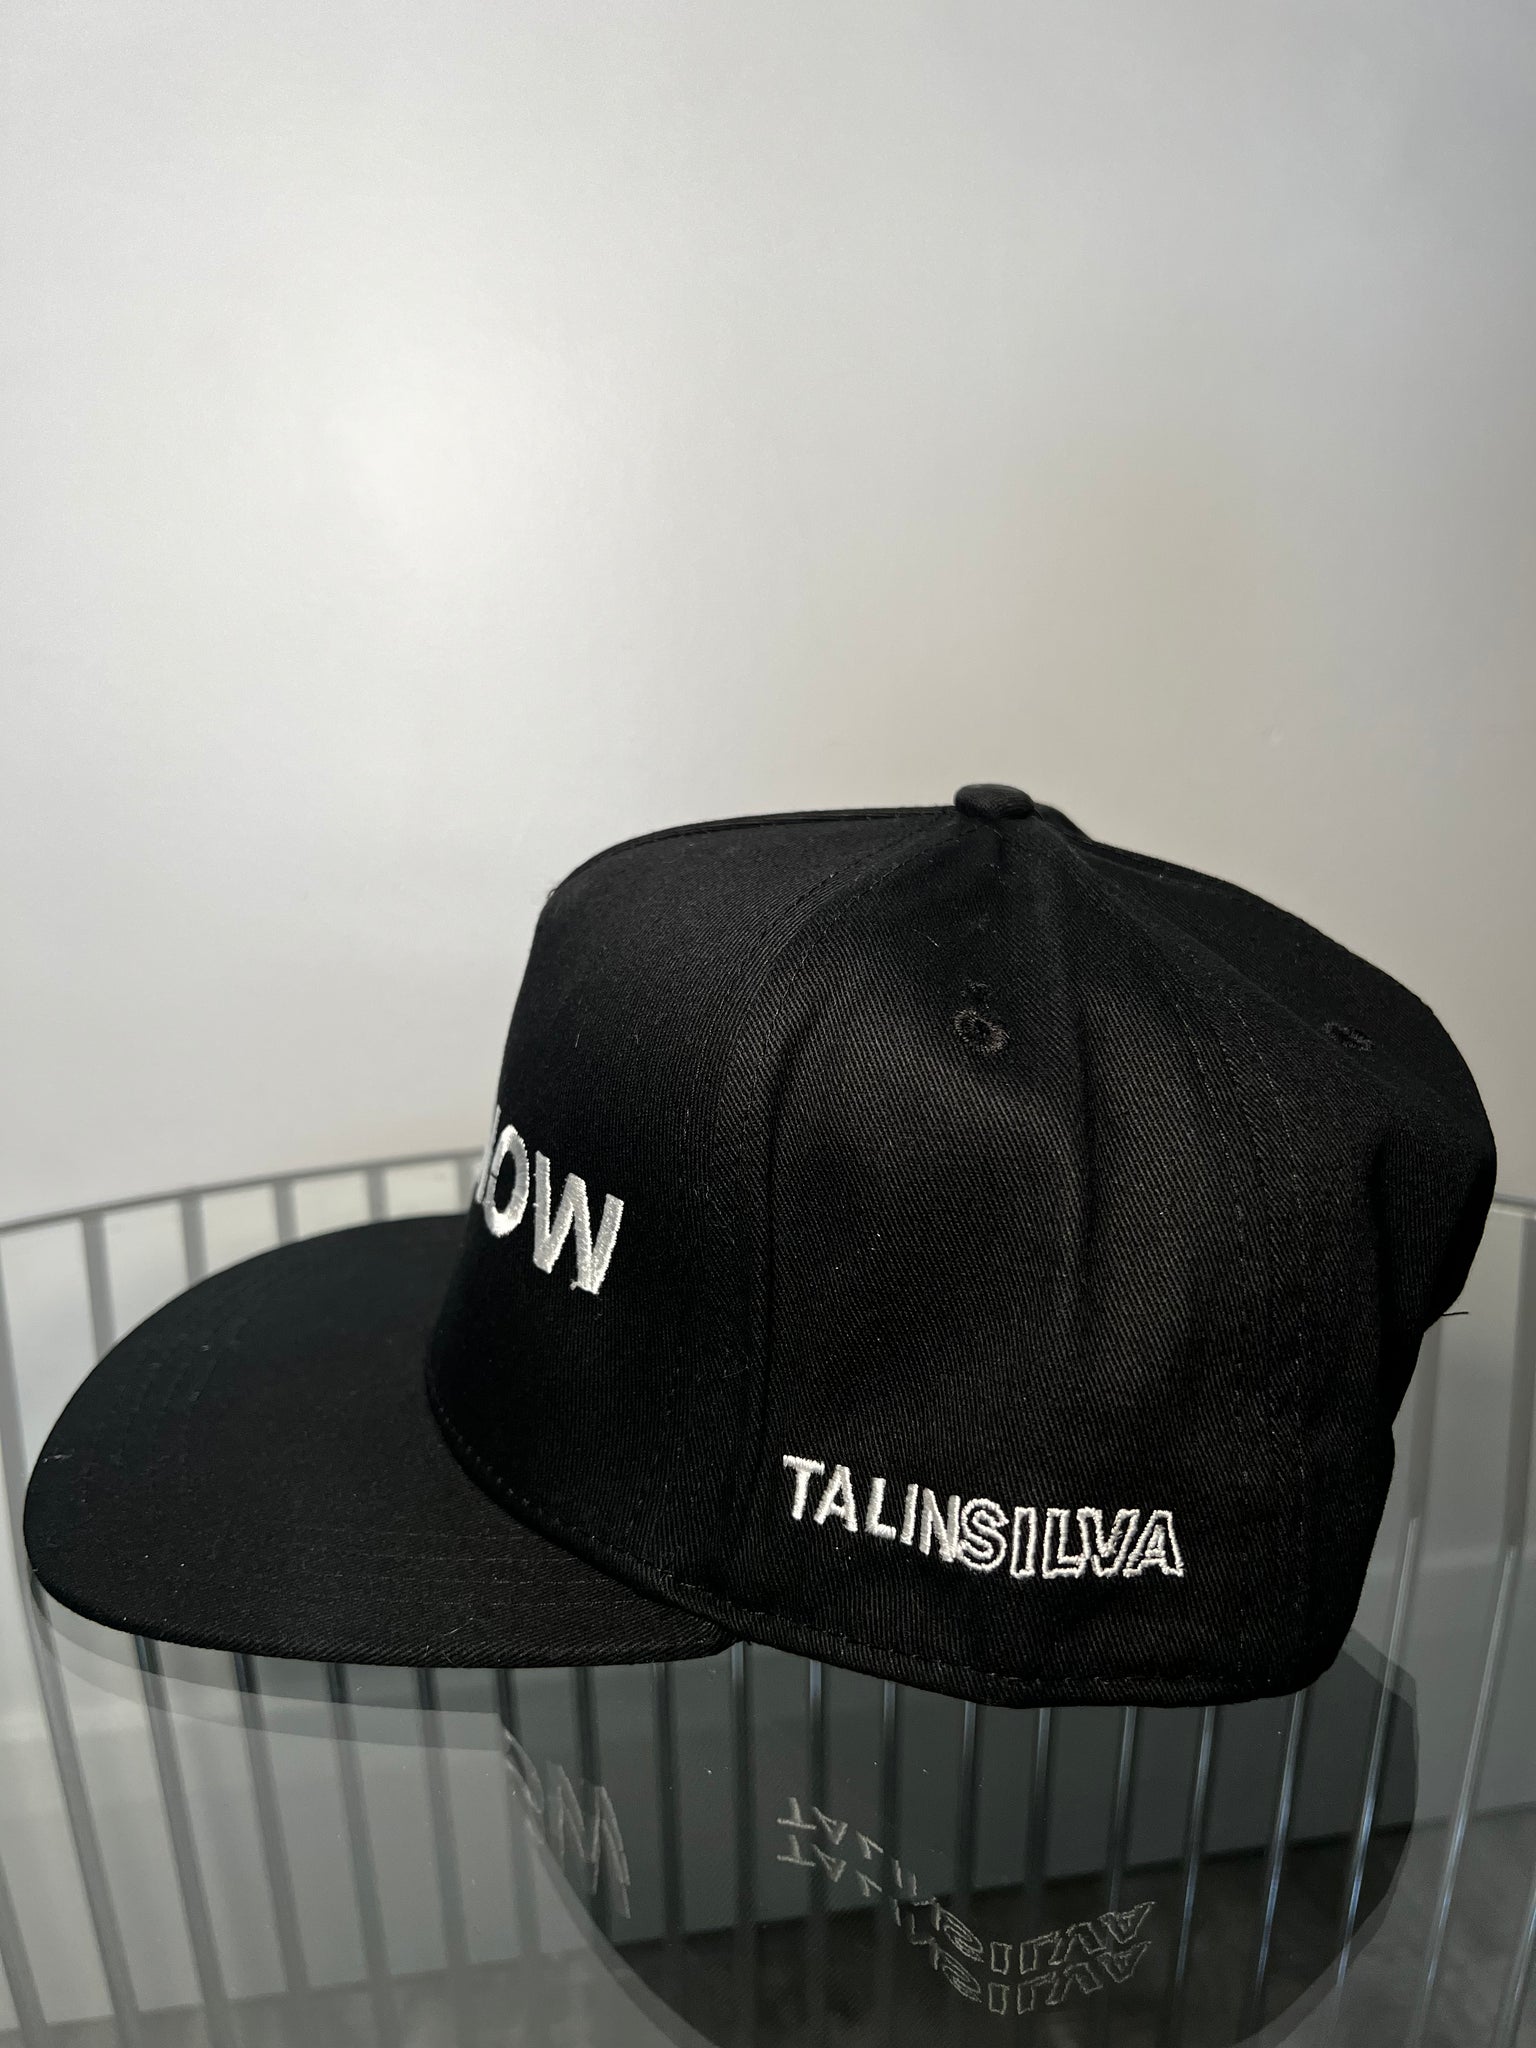 Right Now Black Snapback Hat